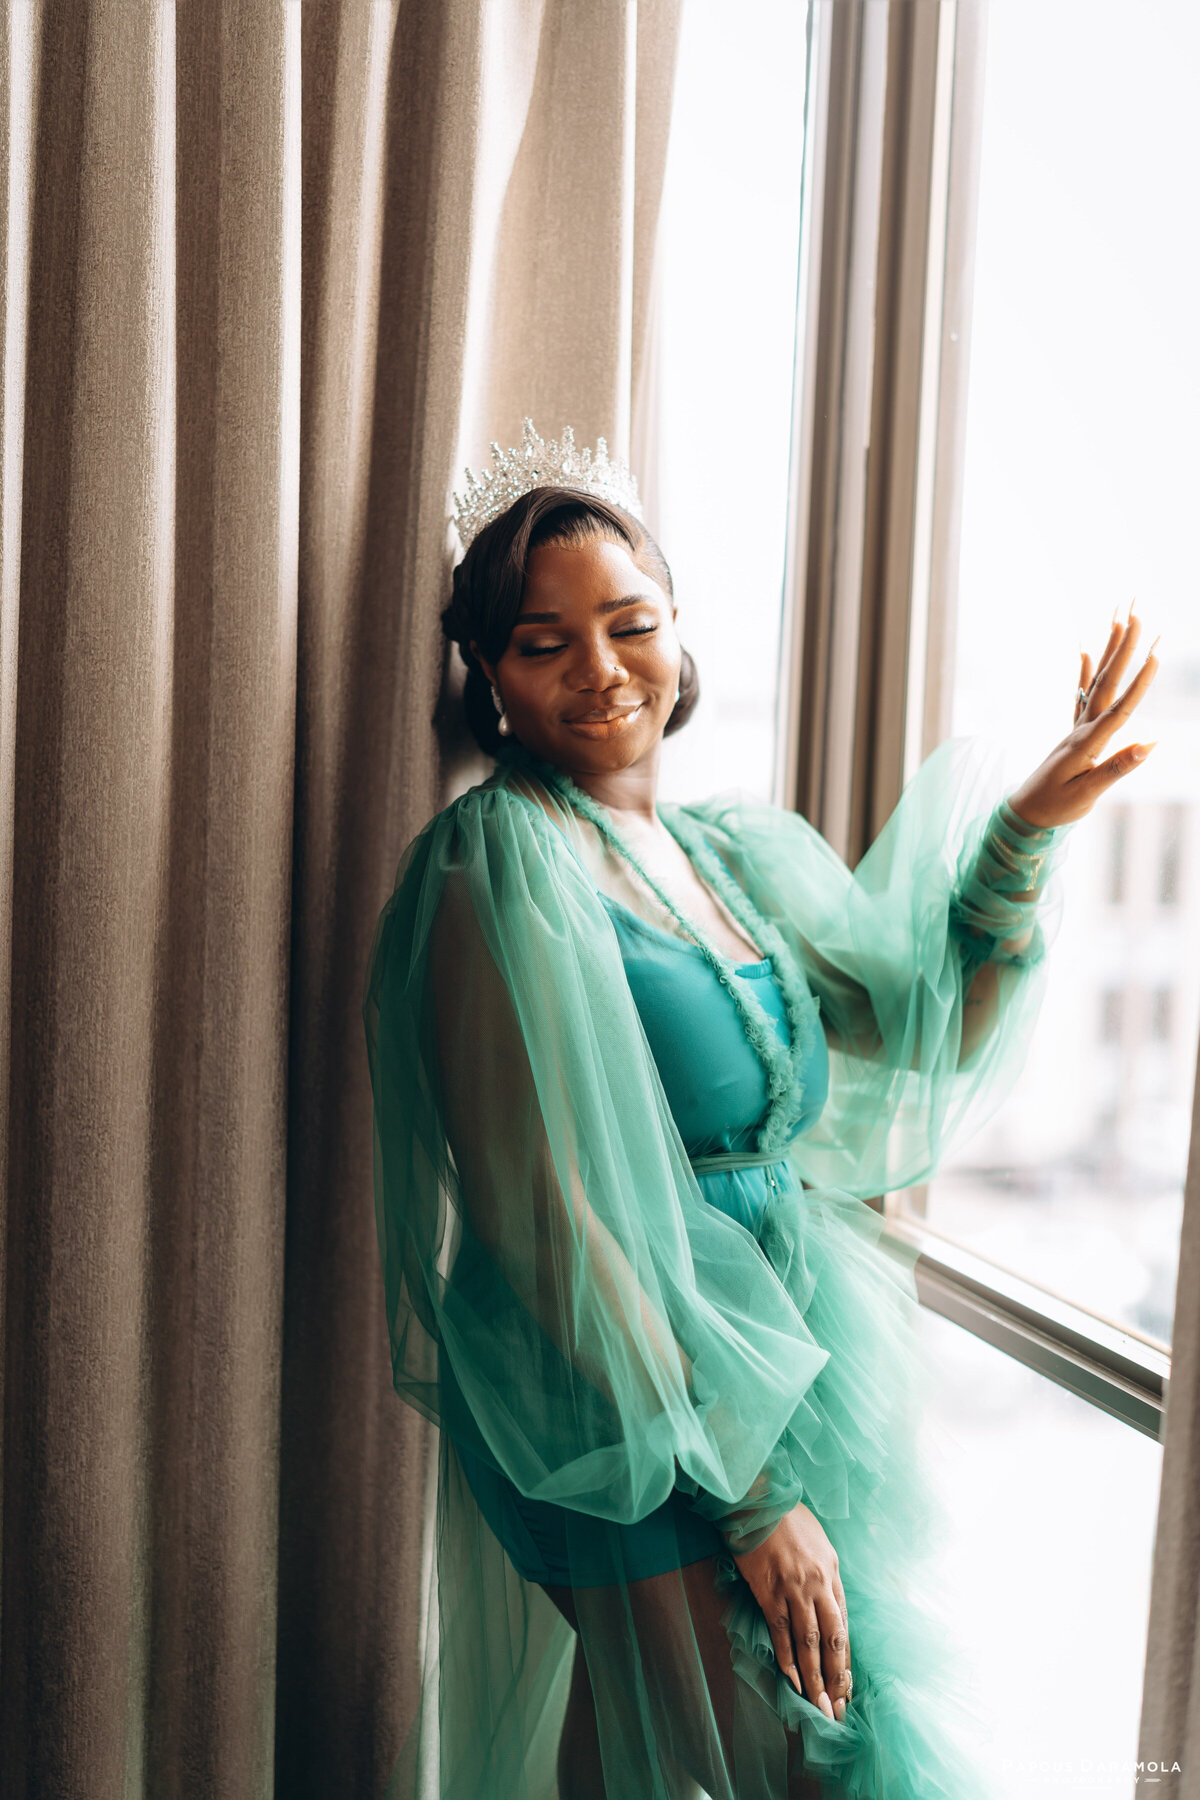 Abigail and Abije Oruka Events Papouse photographer Wedding event planners Toronto planner African Nigerian Eyitayo Dada Dara Ayoola outdoor ceremony floral princess ballgown rolls royce groom suit potraits  paradise banquet hall vaughn 79